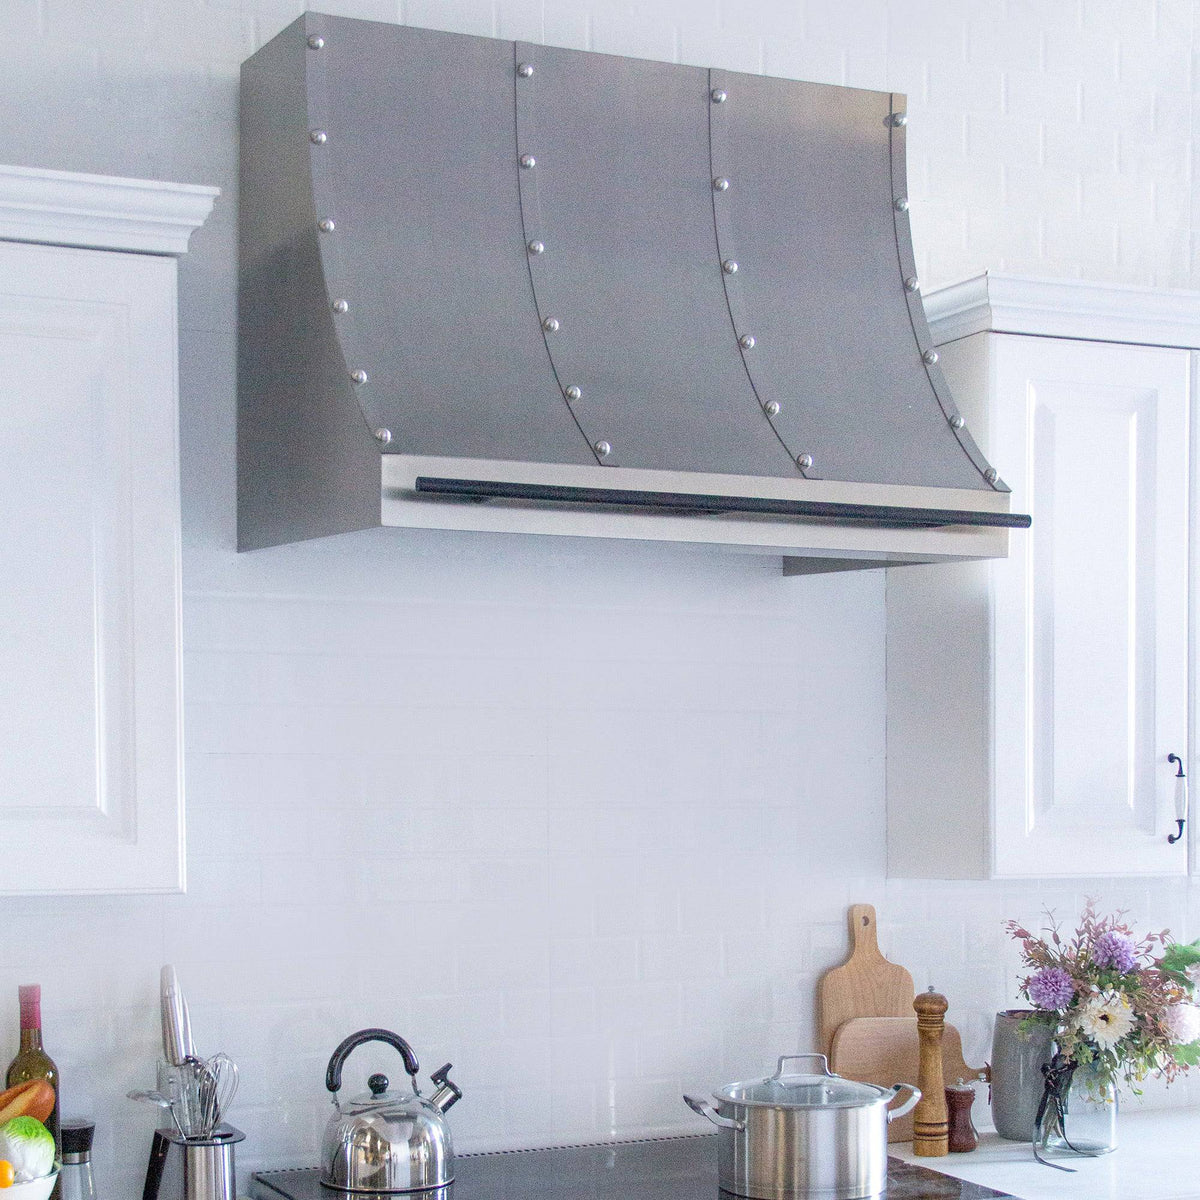 Fobest Handcrafted Custom Brushed Stainless Steel Range Hood FSS-80 - Stainless Steel Range Hood-Fobest Appliance